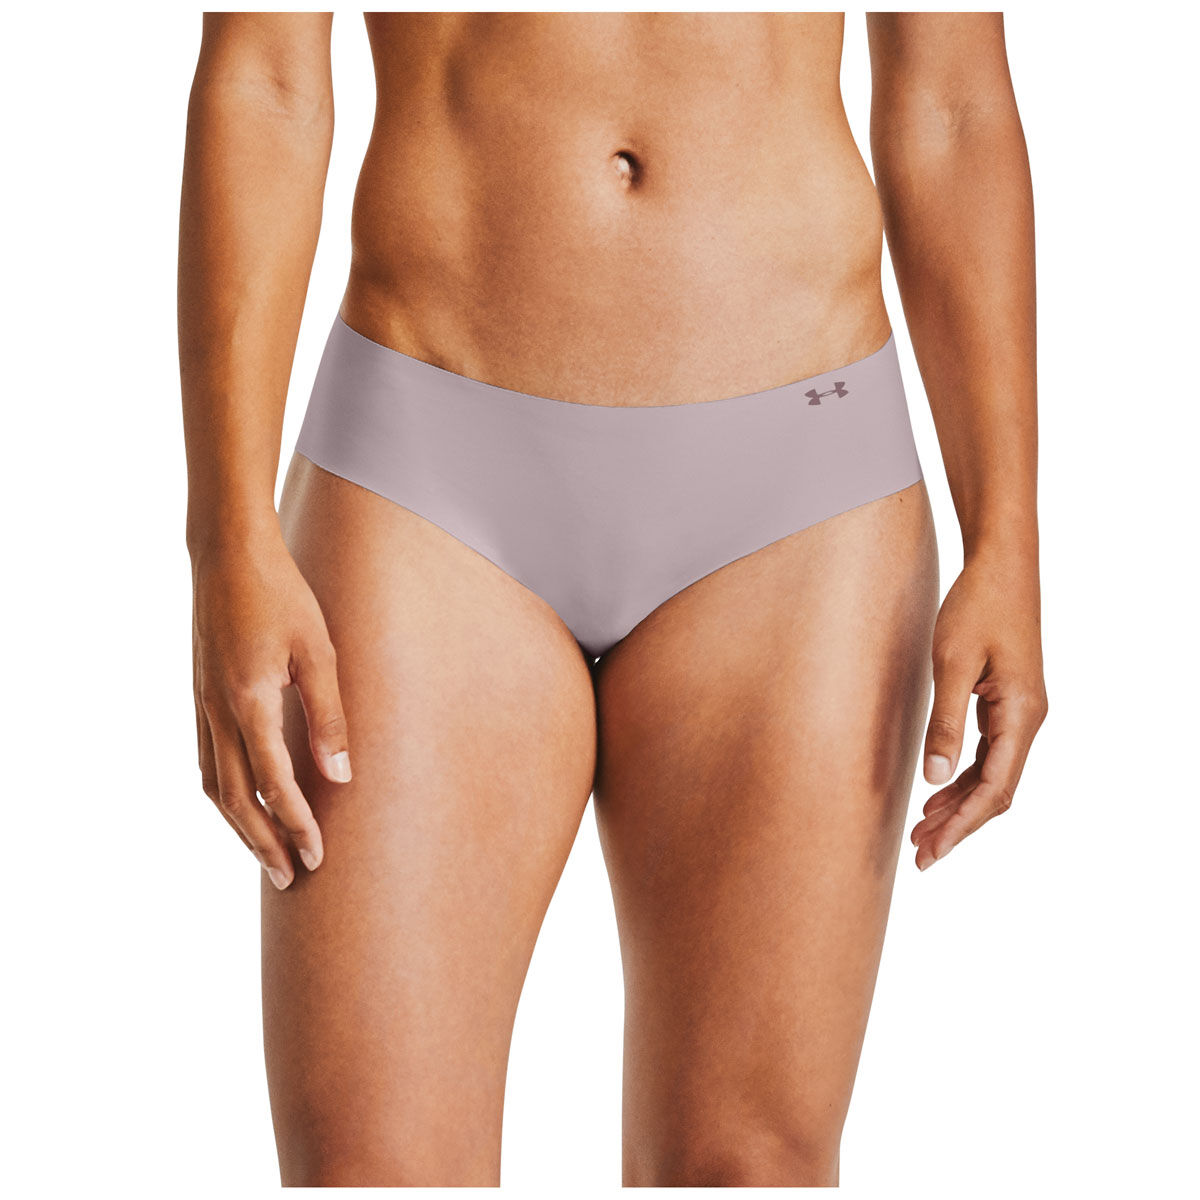 Champion Women's Cotton Stretch Hipster 1 Pack 